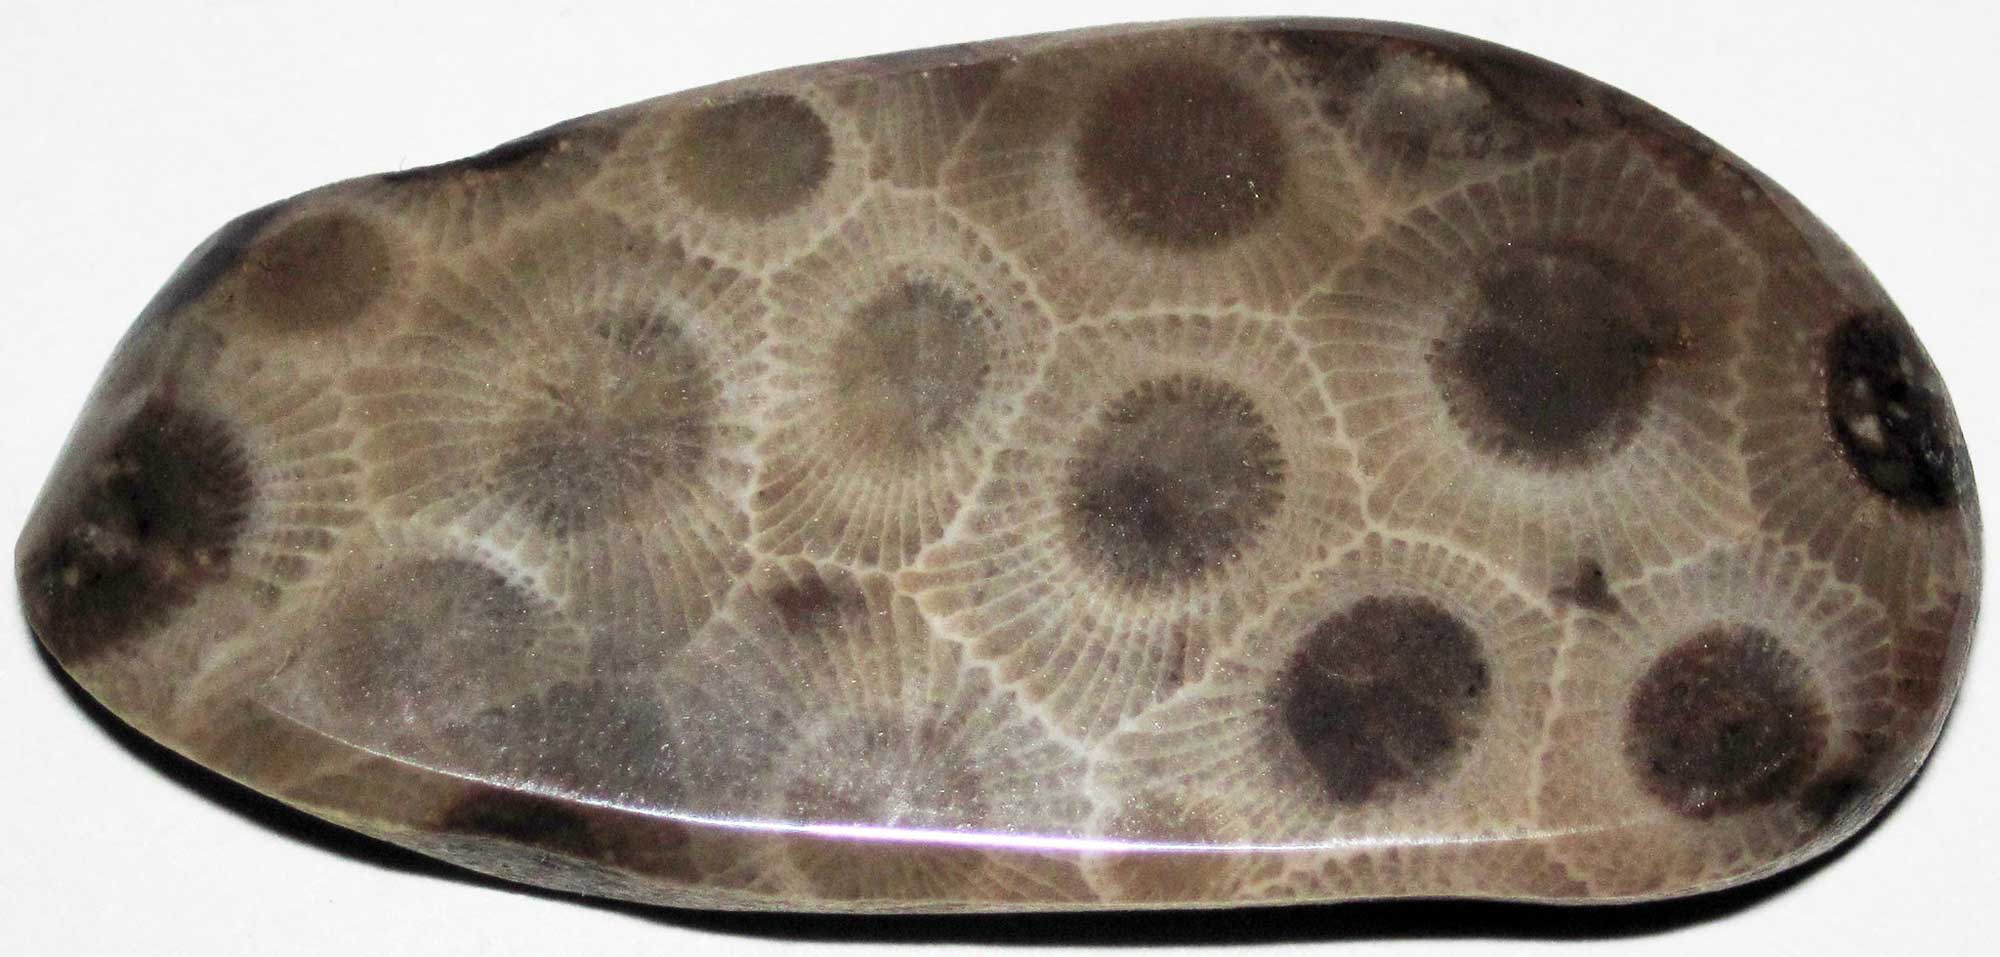 Photograph of a piece of Petoskey stone from Michigan.